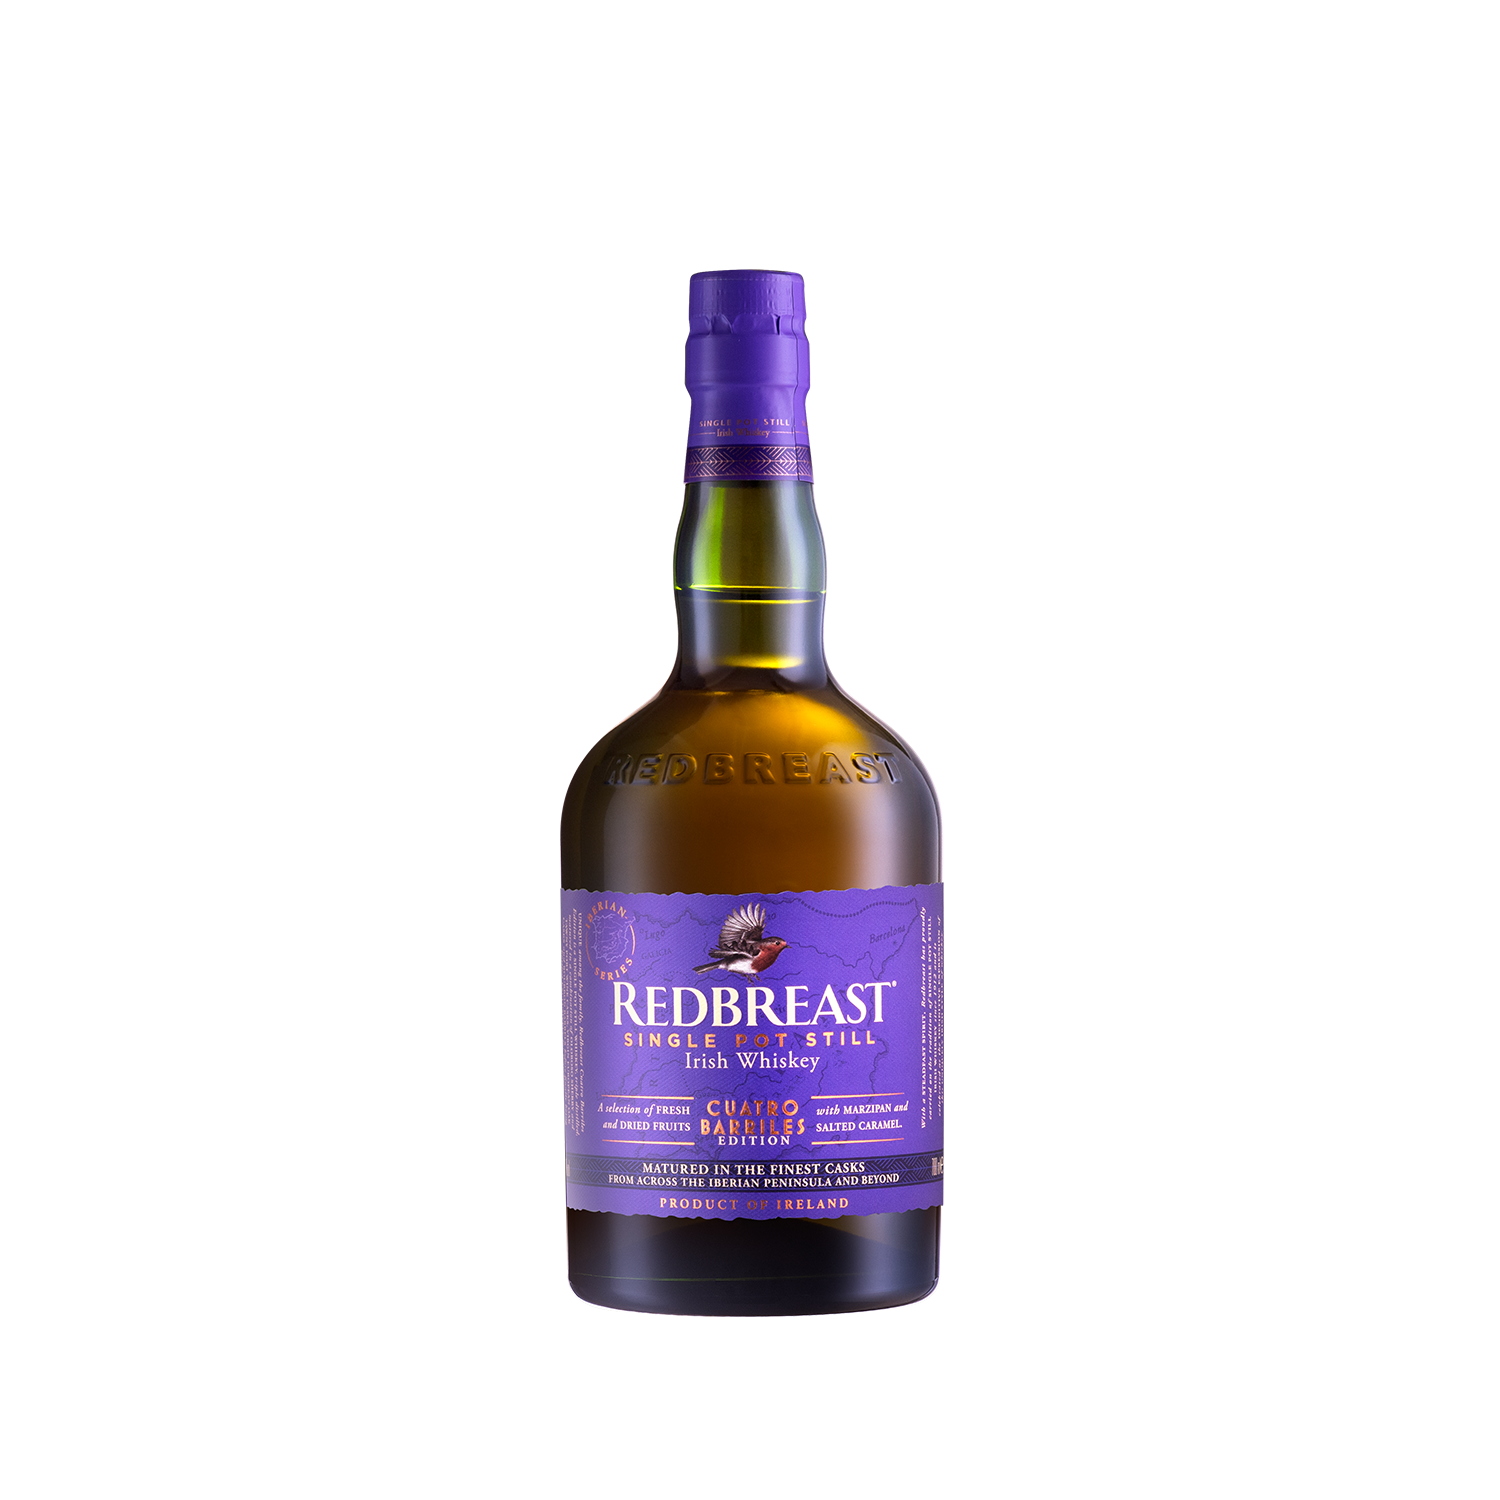 New Redbreast Exclusive Announced for Travel Retail